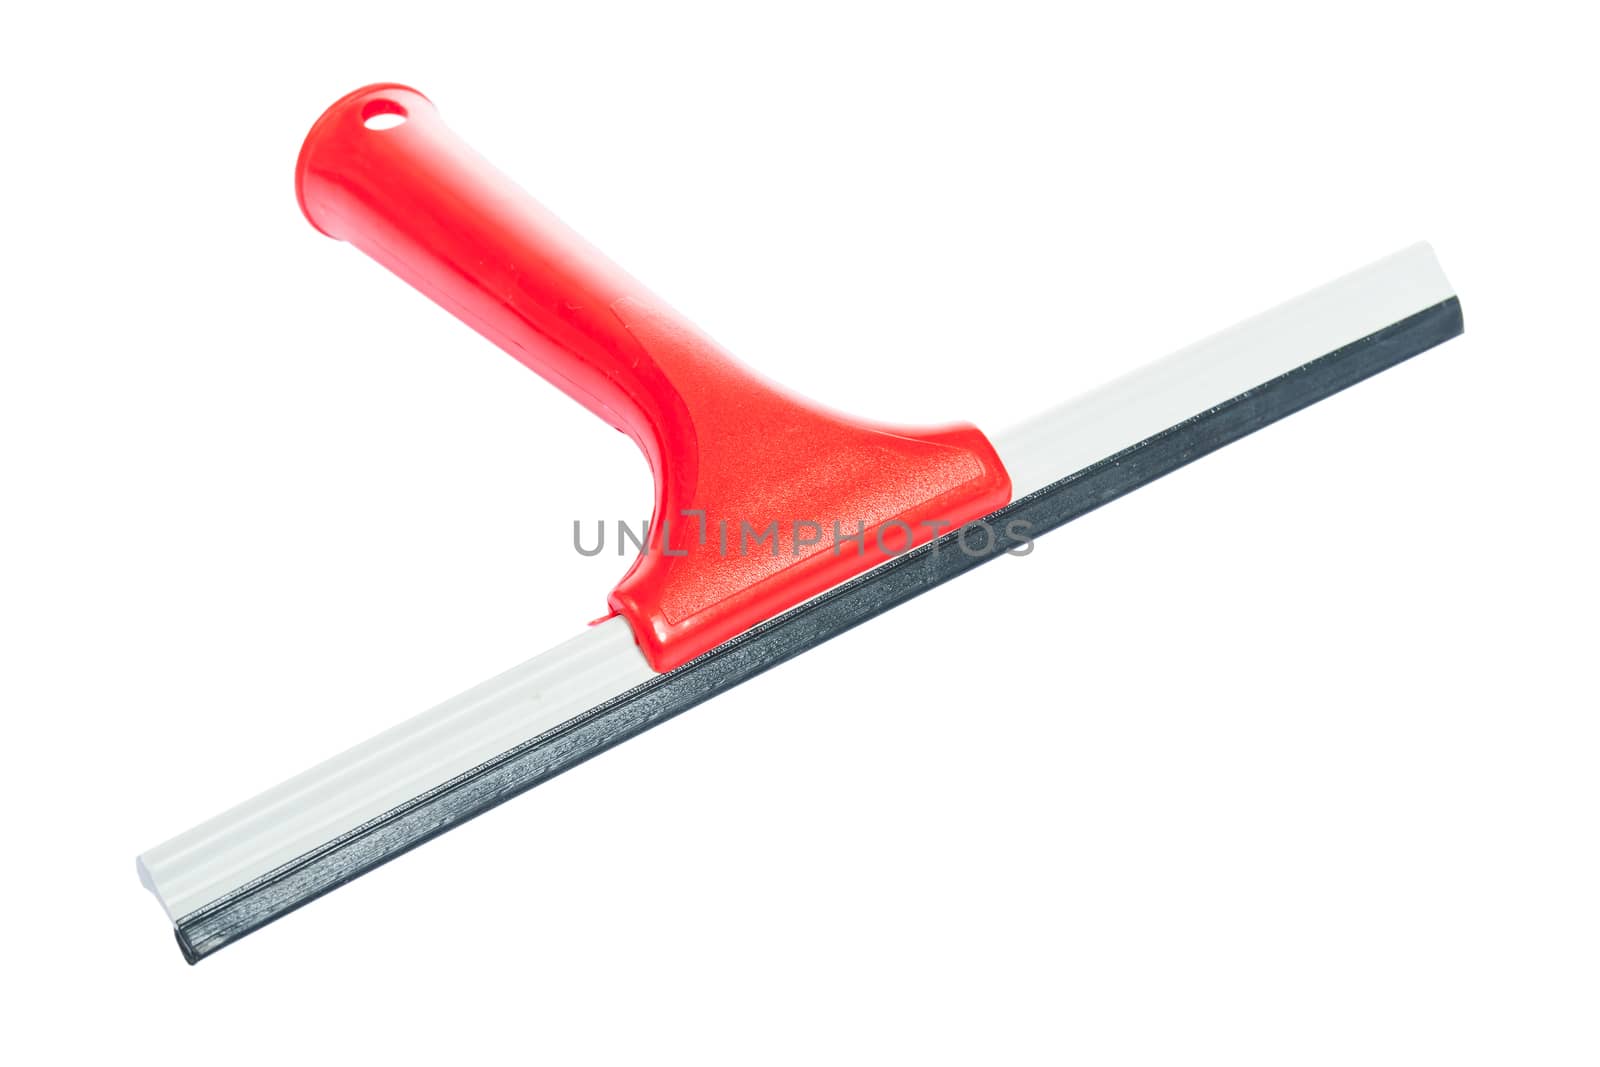 window squeegee with red handle isolated on white background